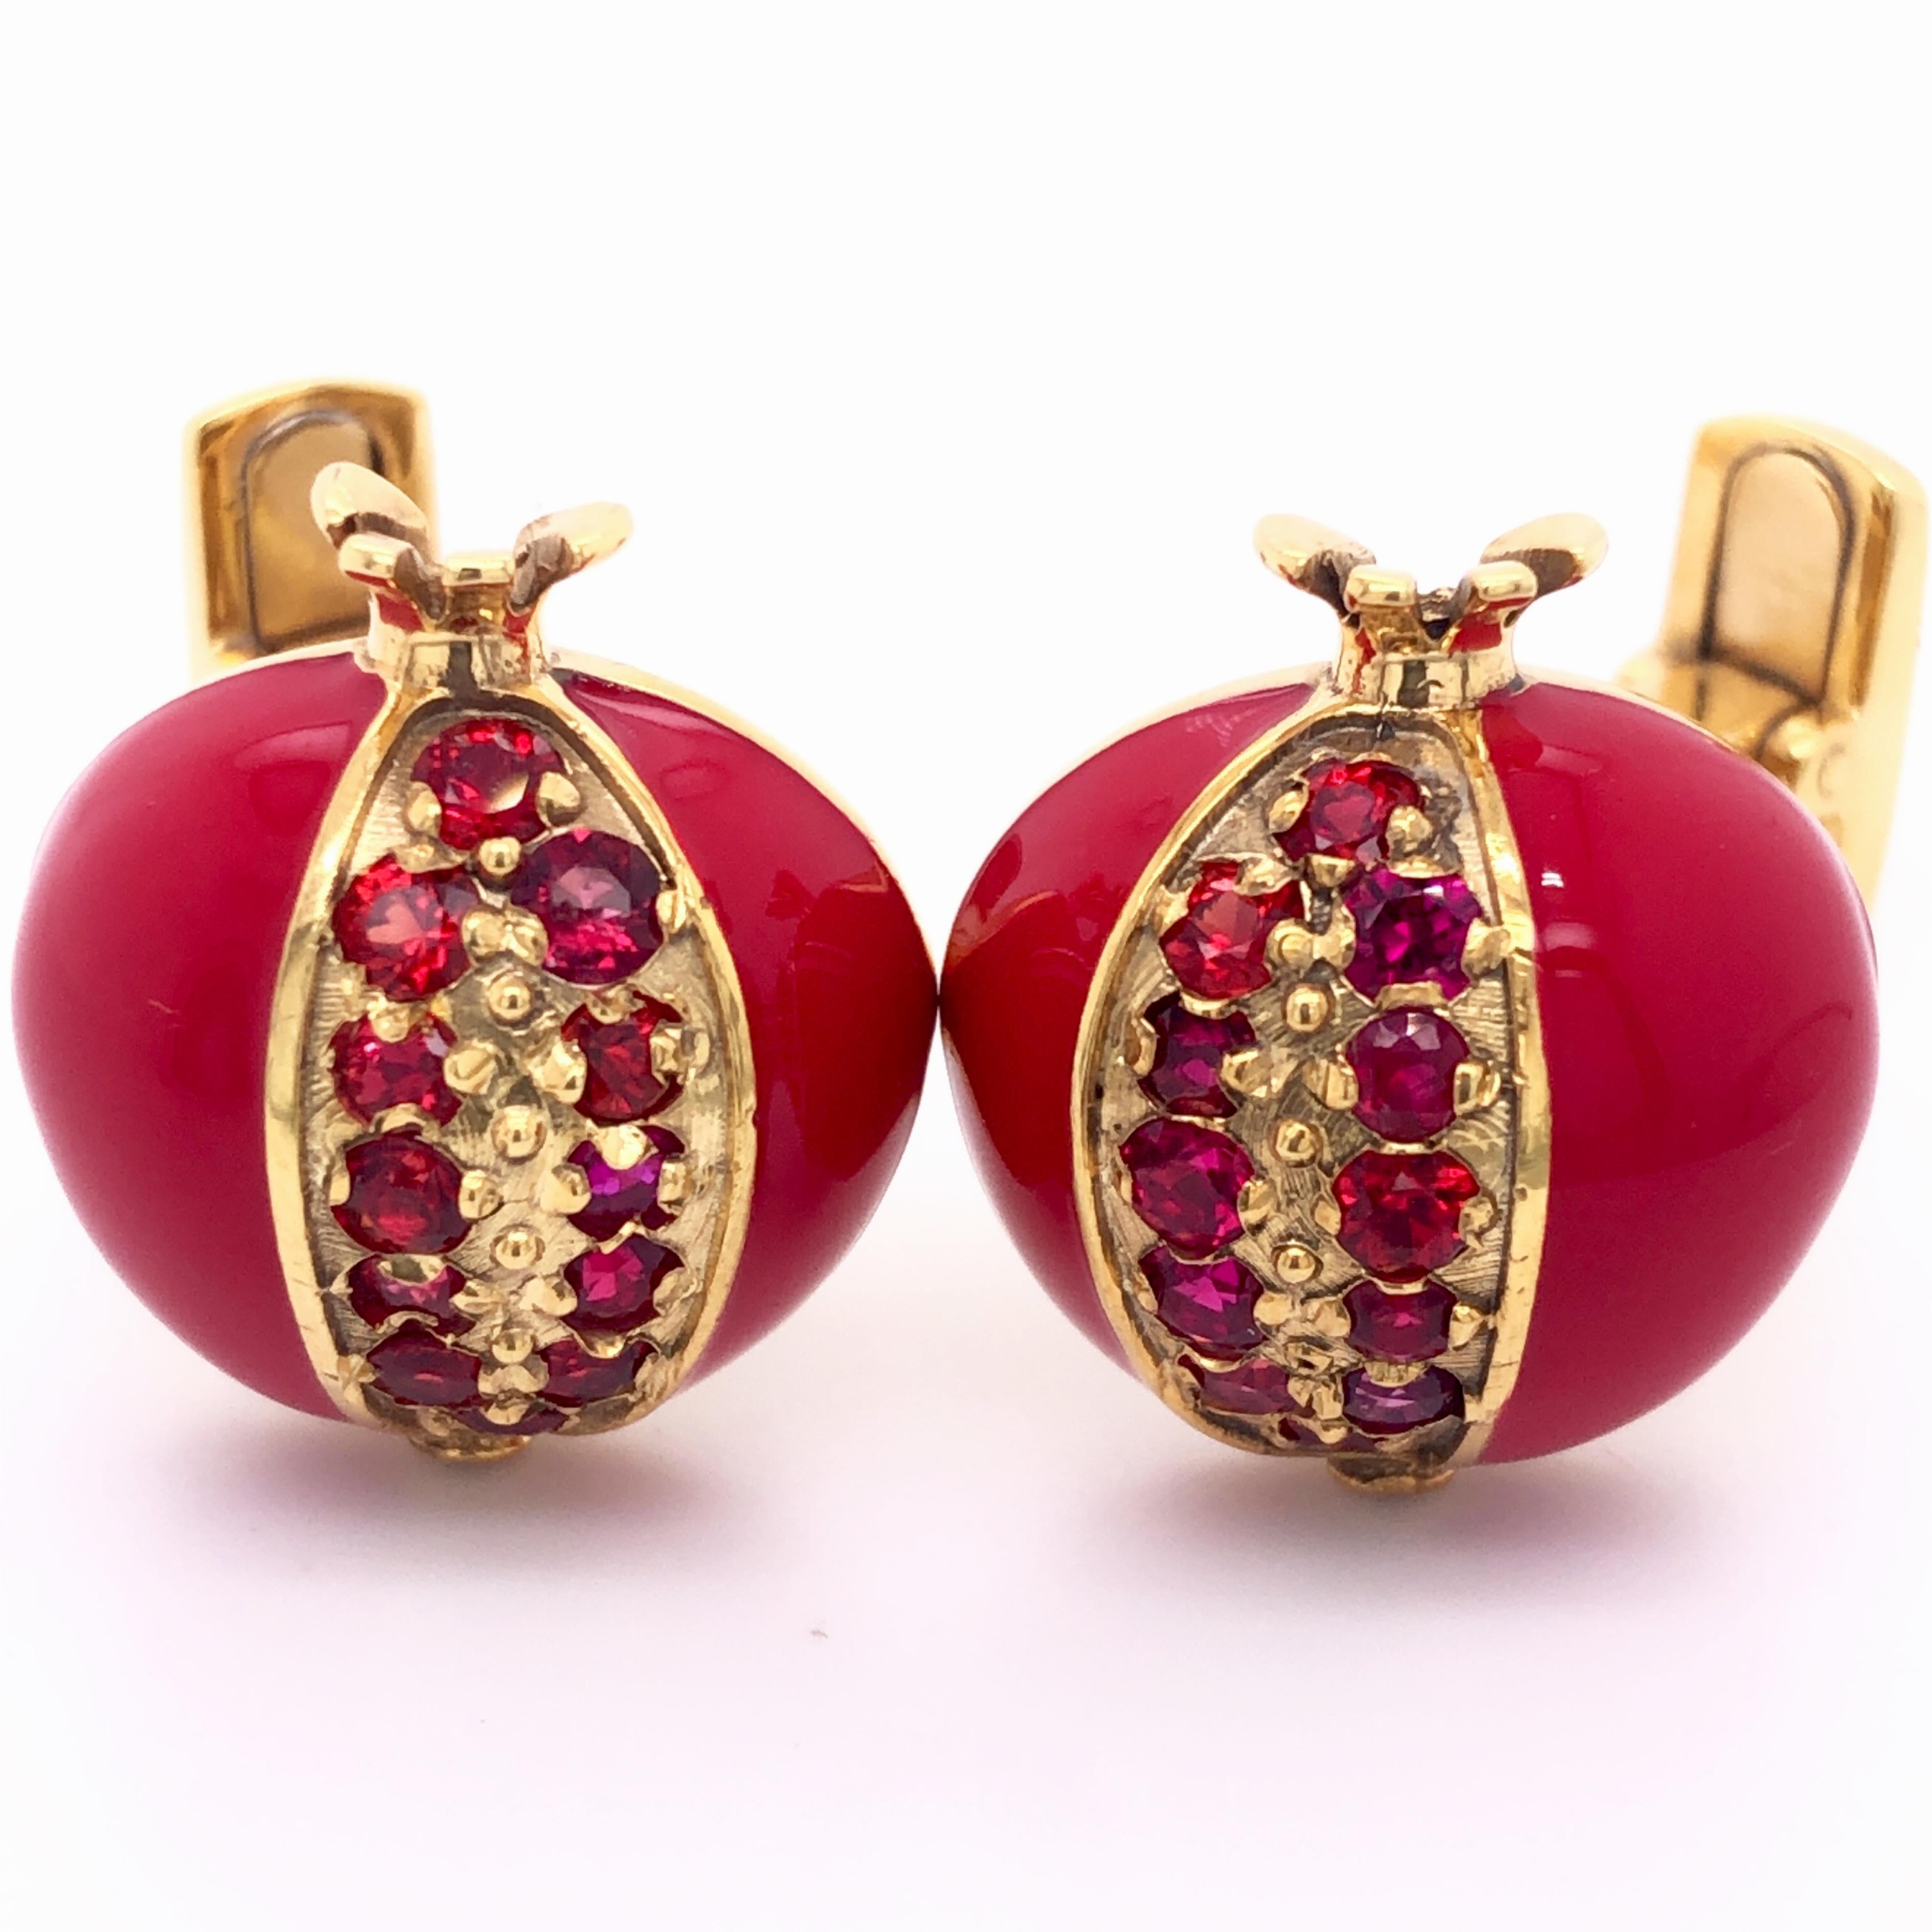 Berca 2.05 Karat Ruby Red Hand Enameled Pomegranate Shaped Gold Cufflinks For Sale 7